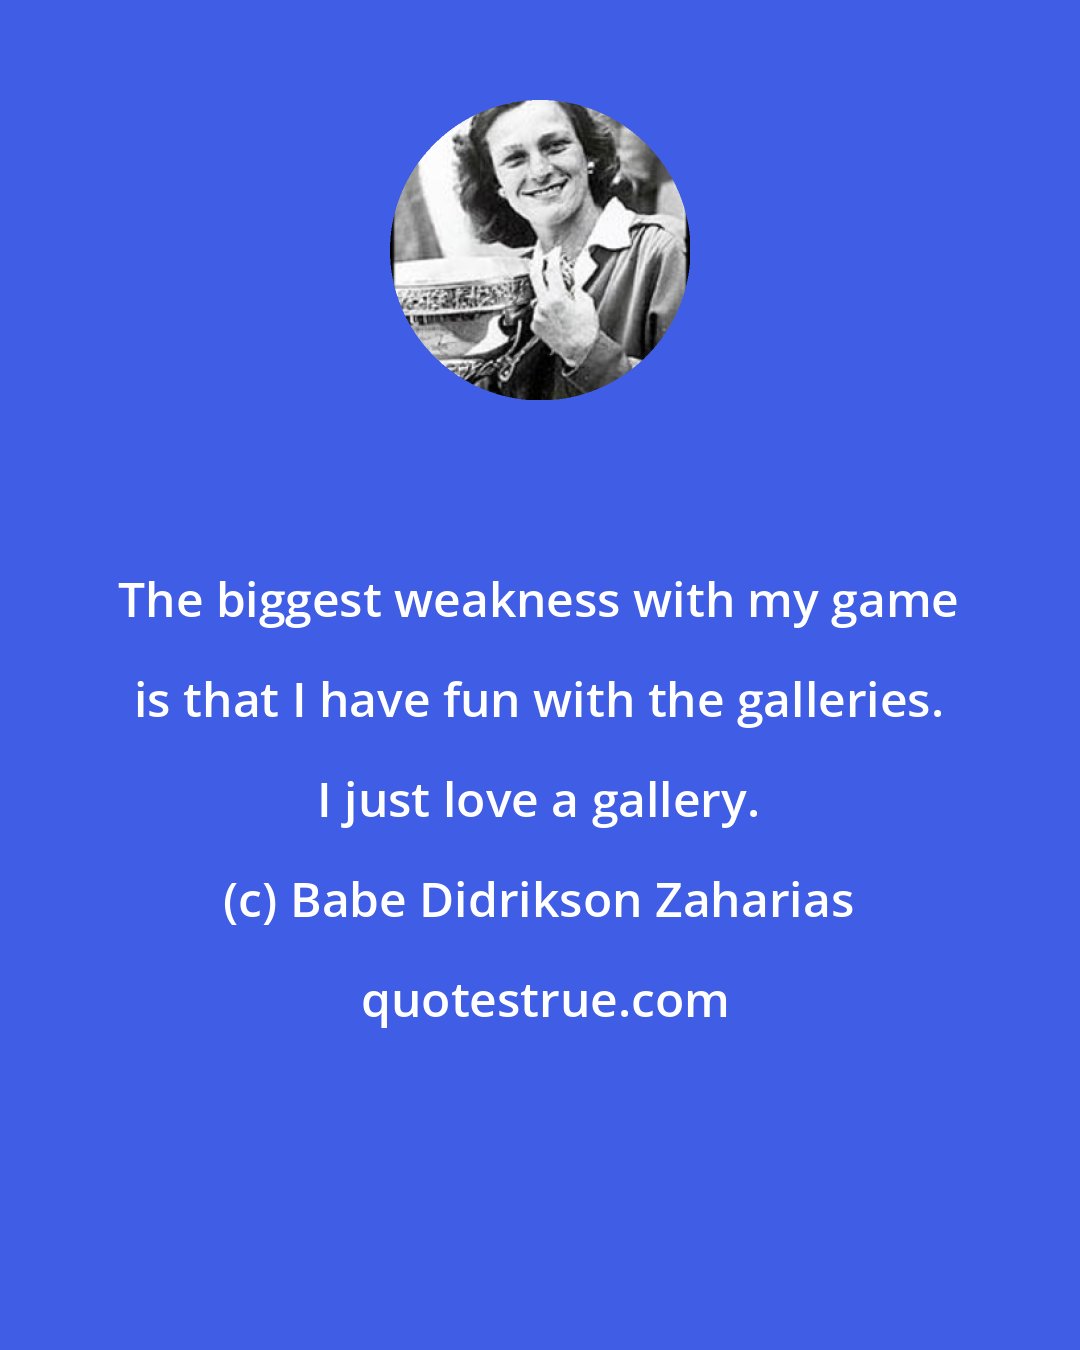 Babe Didrikson Zaharias: The biggest weakness with my game is that I have fun with the galleries. I just love a gallery.